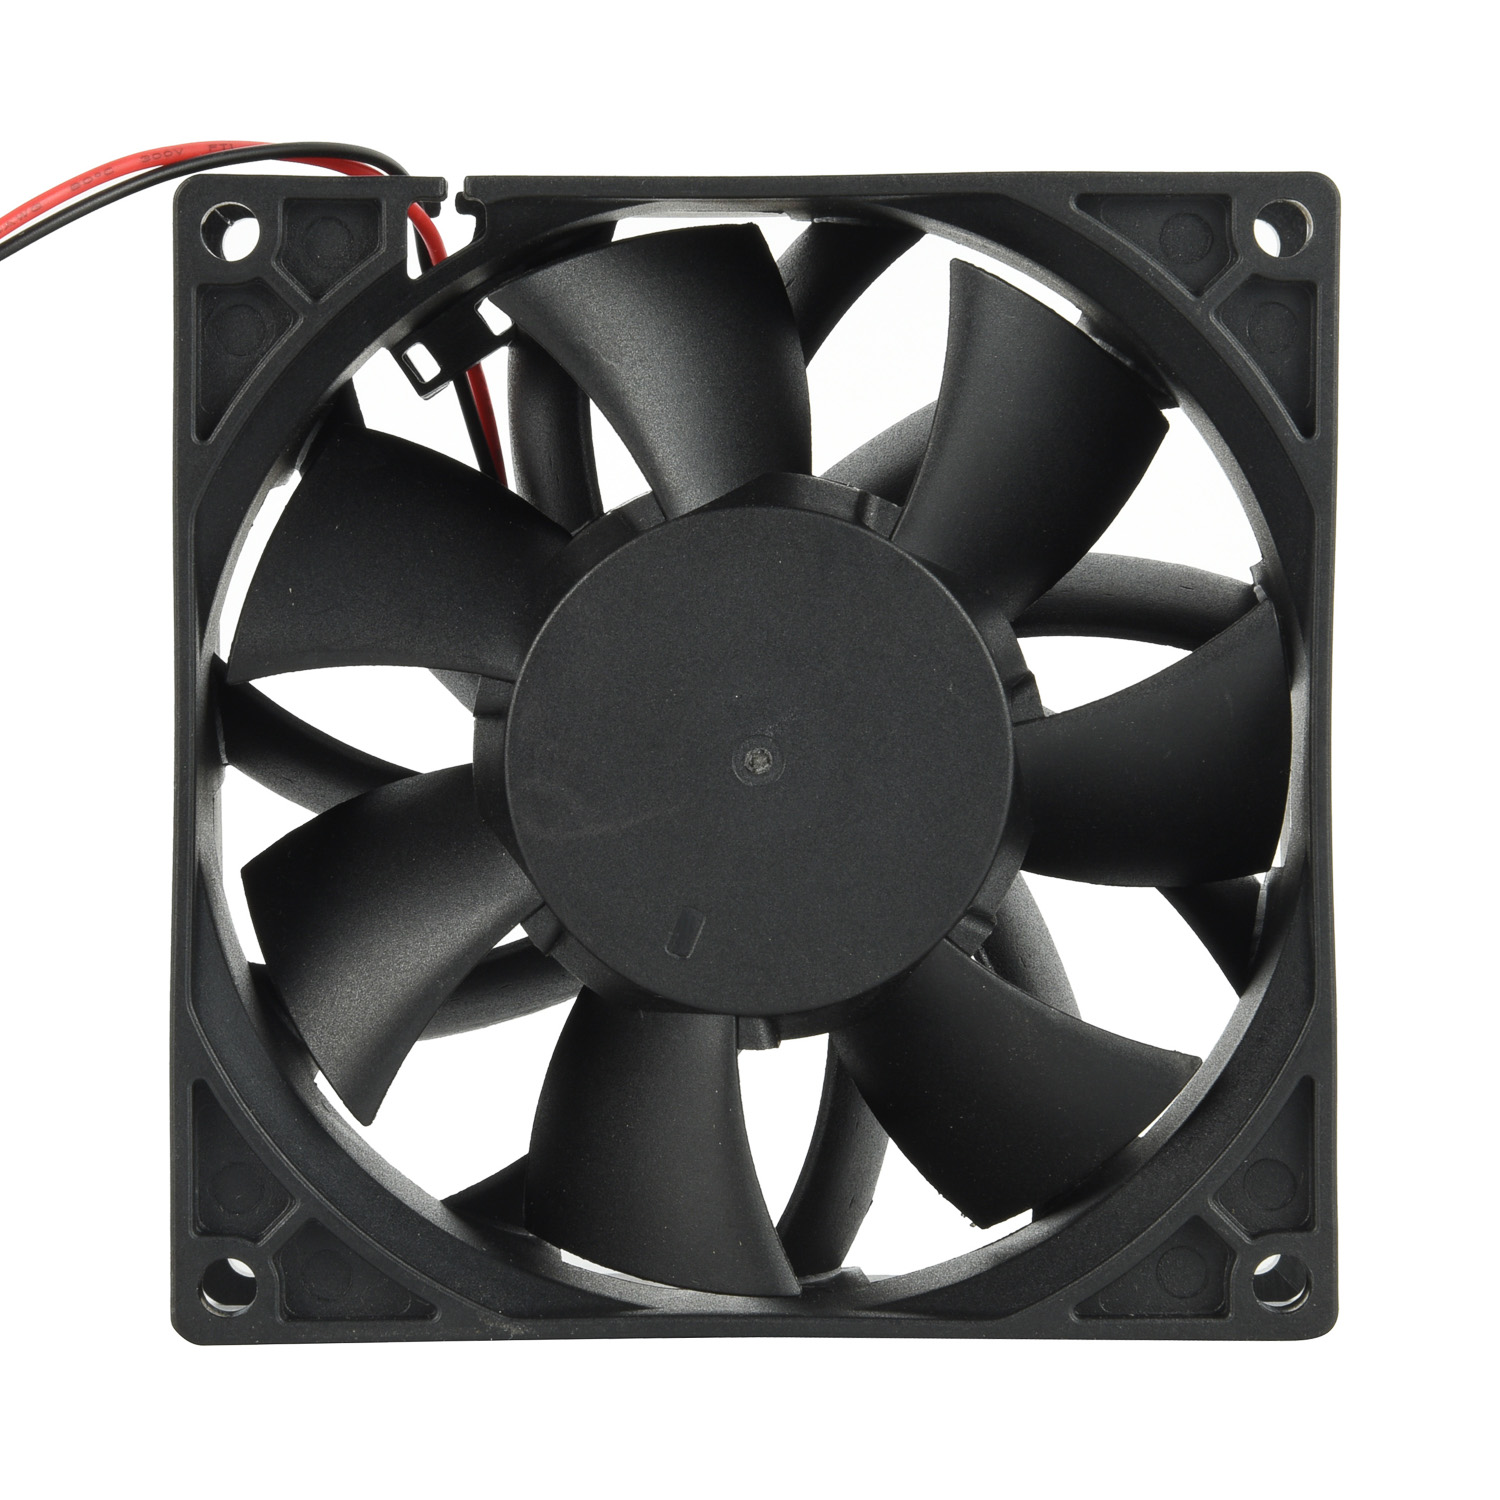 High-Performance EC 9238 Axial Cooling Fan with 92mm*92mm*38mm